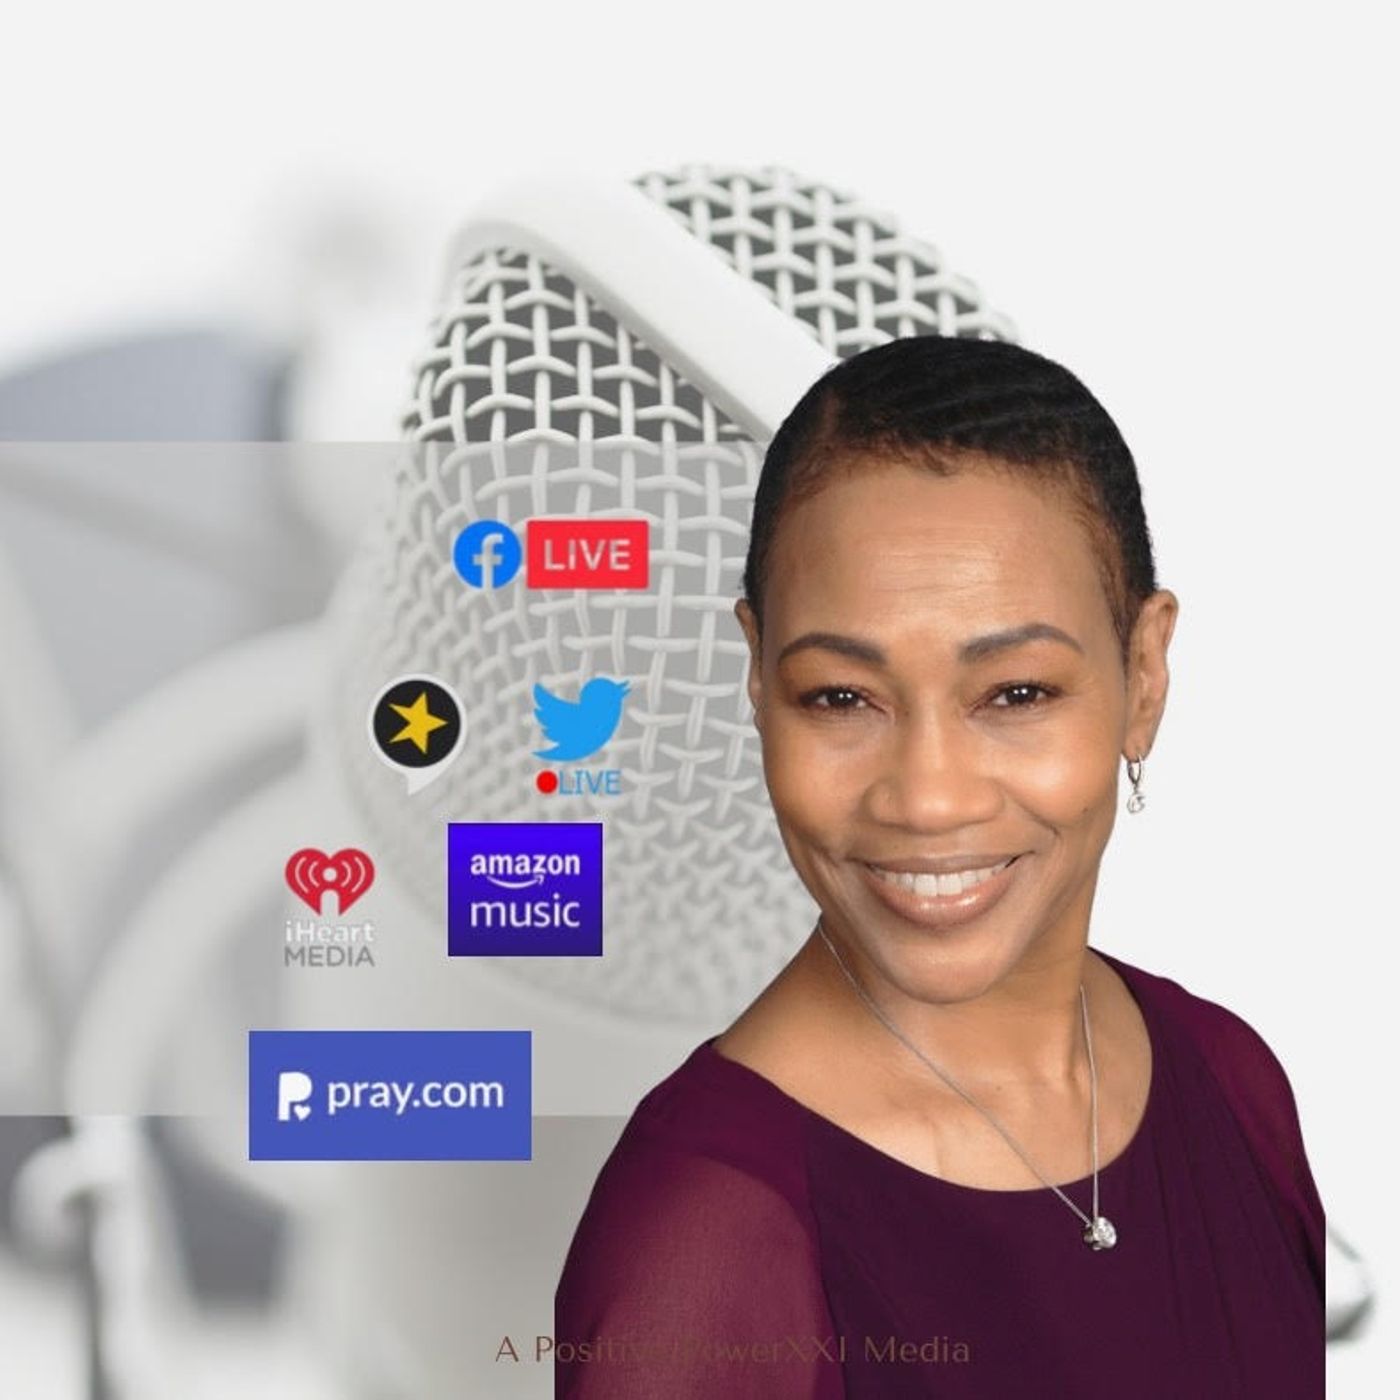 HEALTH CHAT WITH COACH JEAN EP 101 Special Guest - Ms. Chelsia Strain aka Coach Chelsia